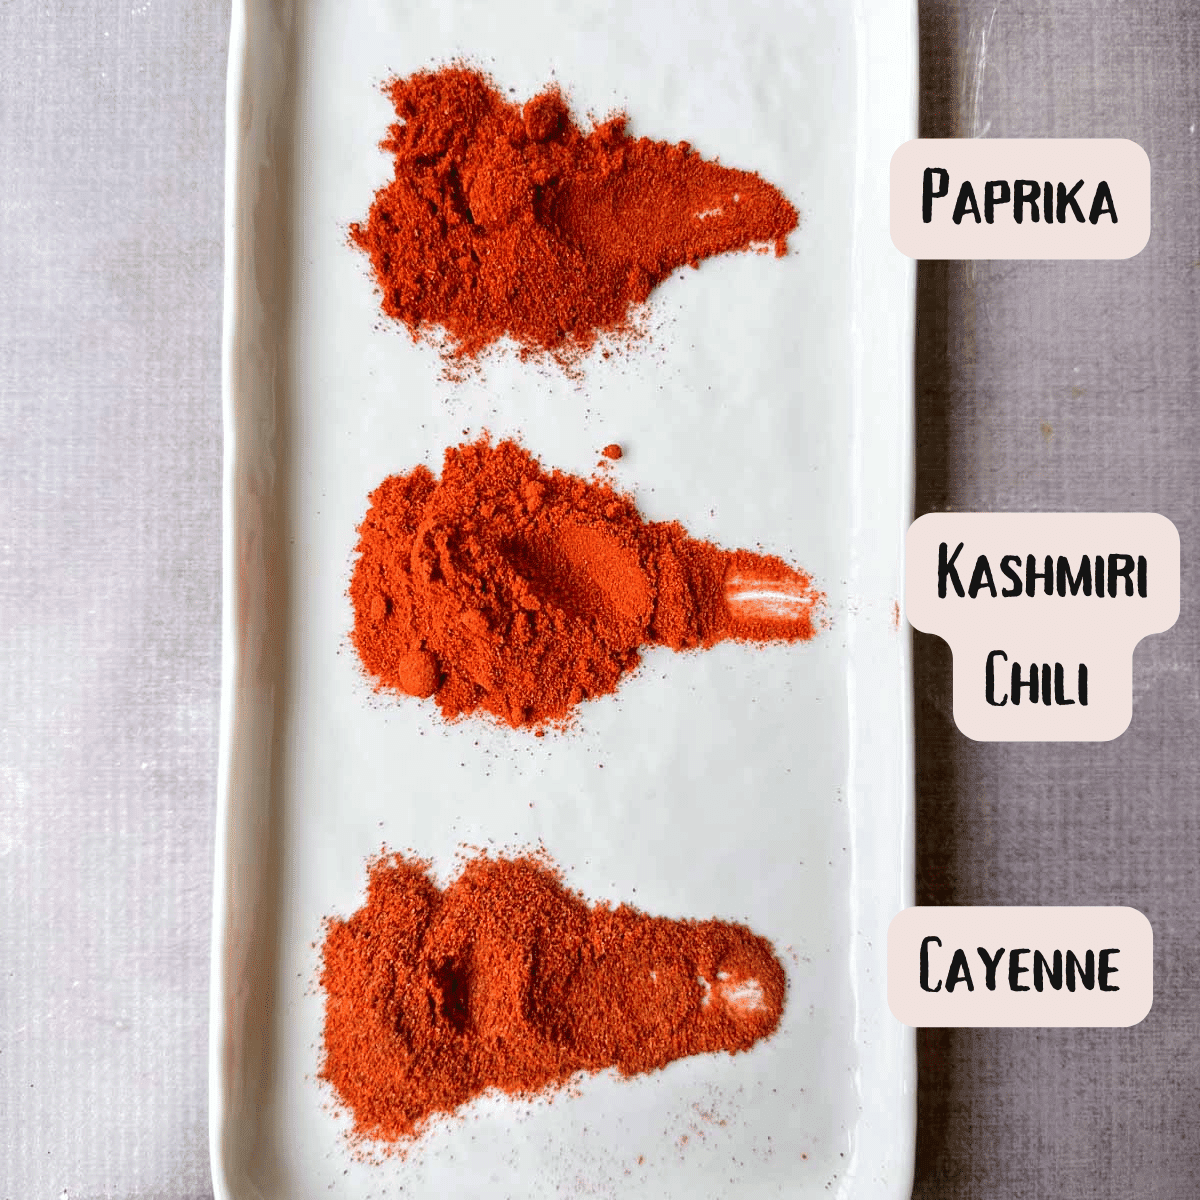 A plate with paprika on top, Kashmiri chili in the middle and cayenne at the bottom.